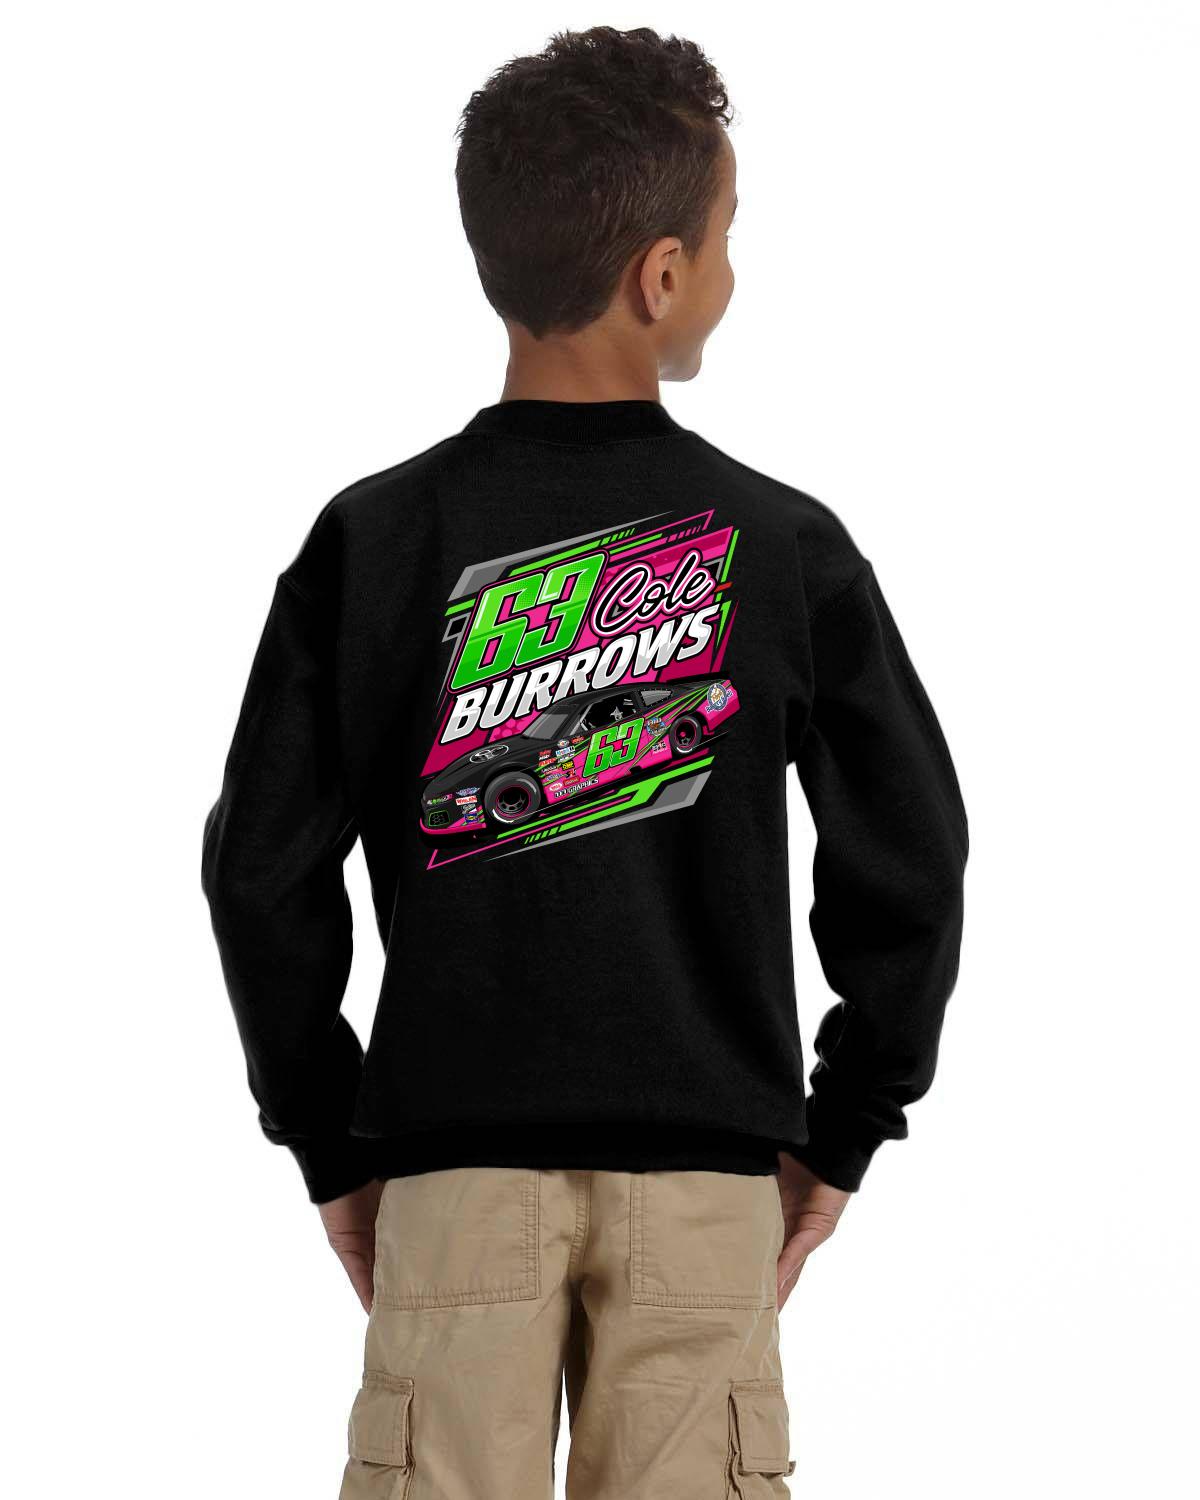 Cole Burrows Racing Youth Crew neck sweater